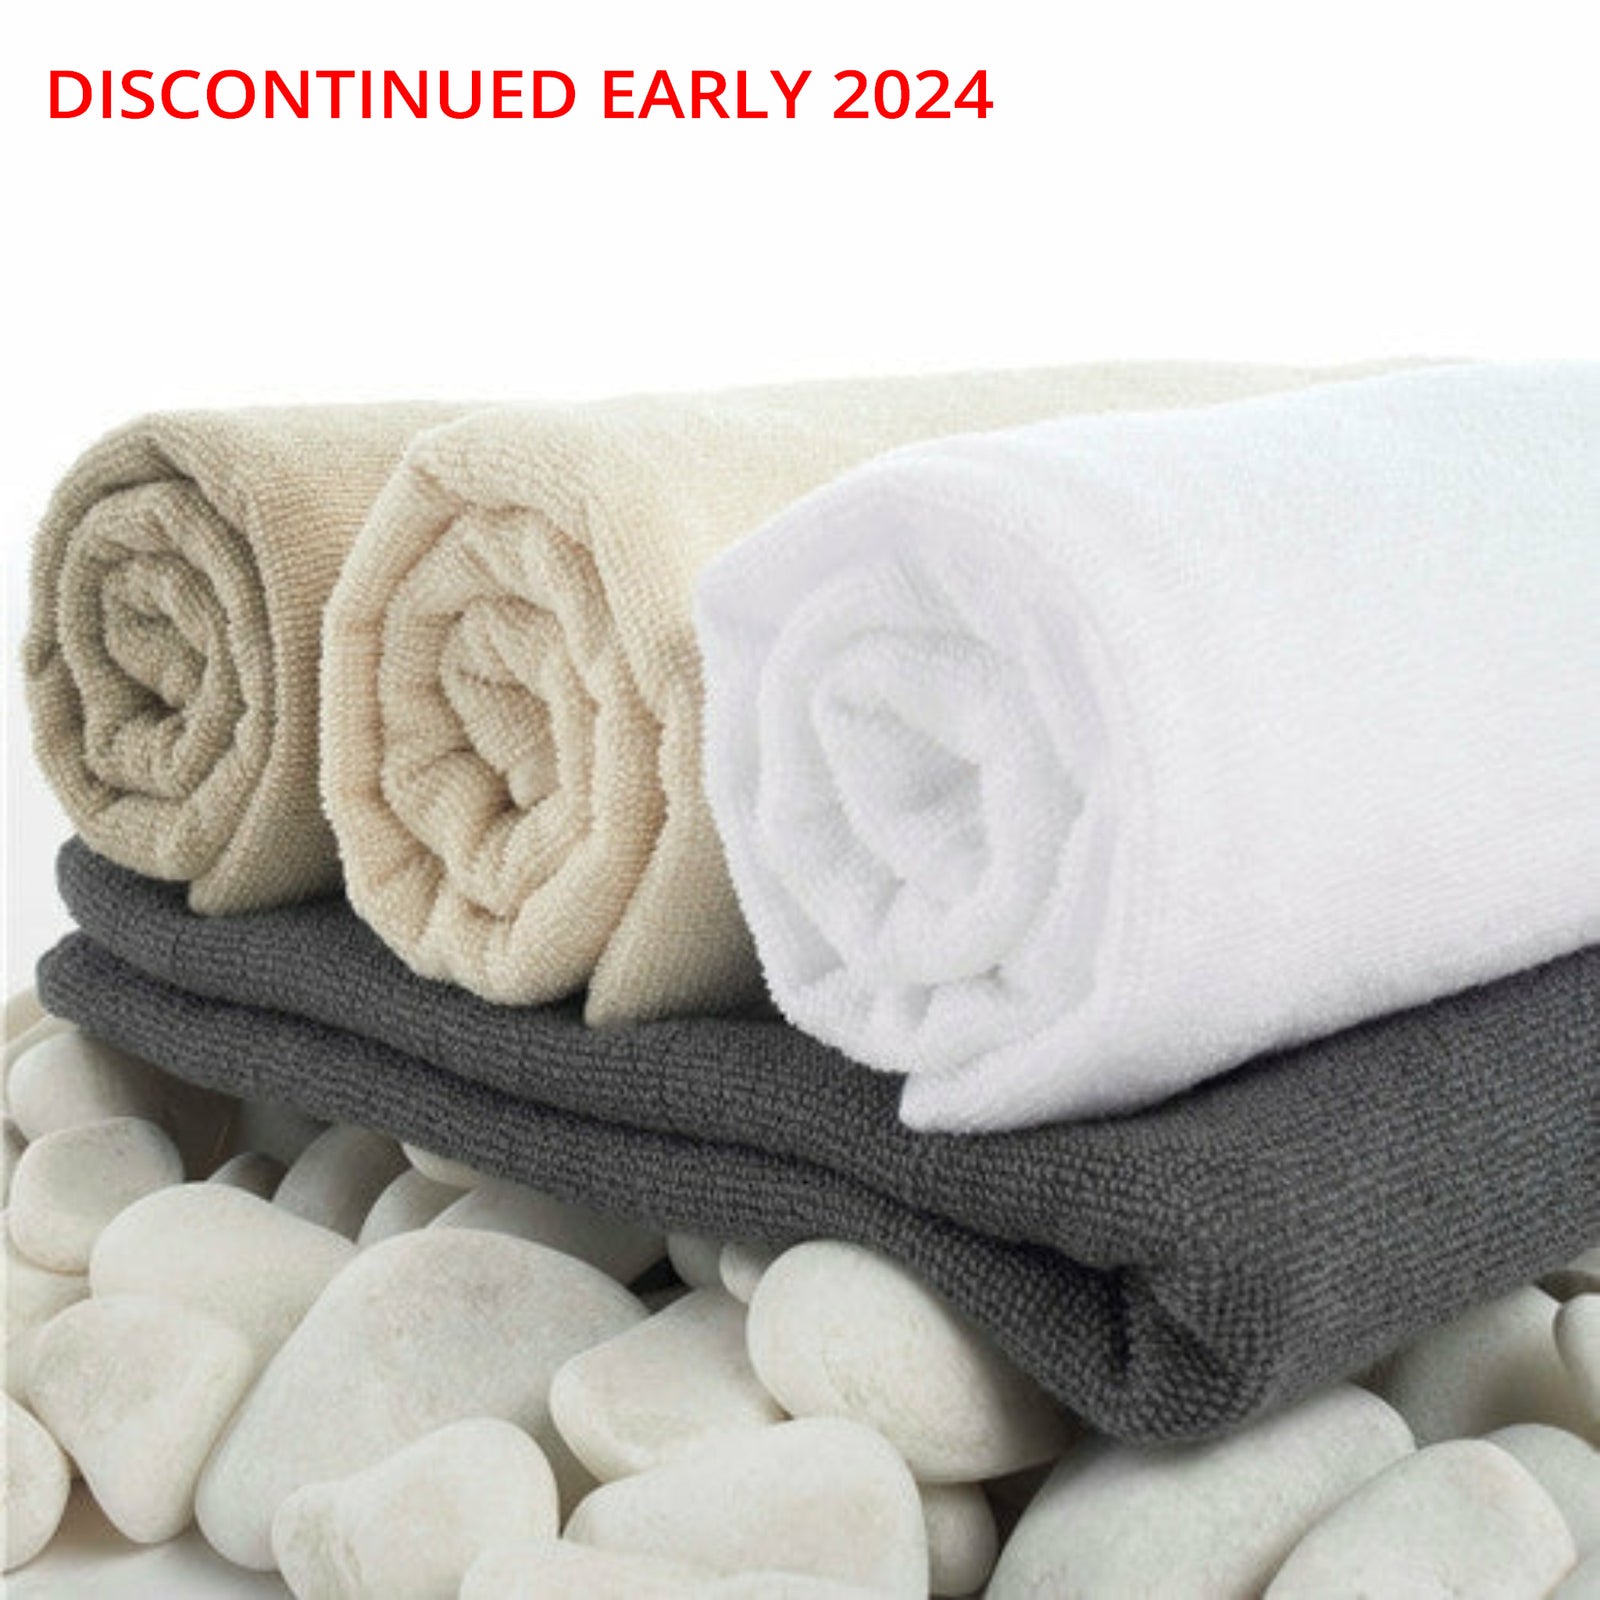 A Complete Guide to Cotton Towel Care